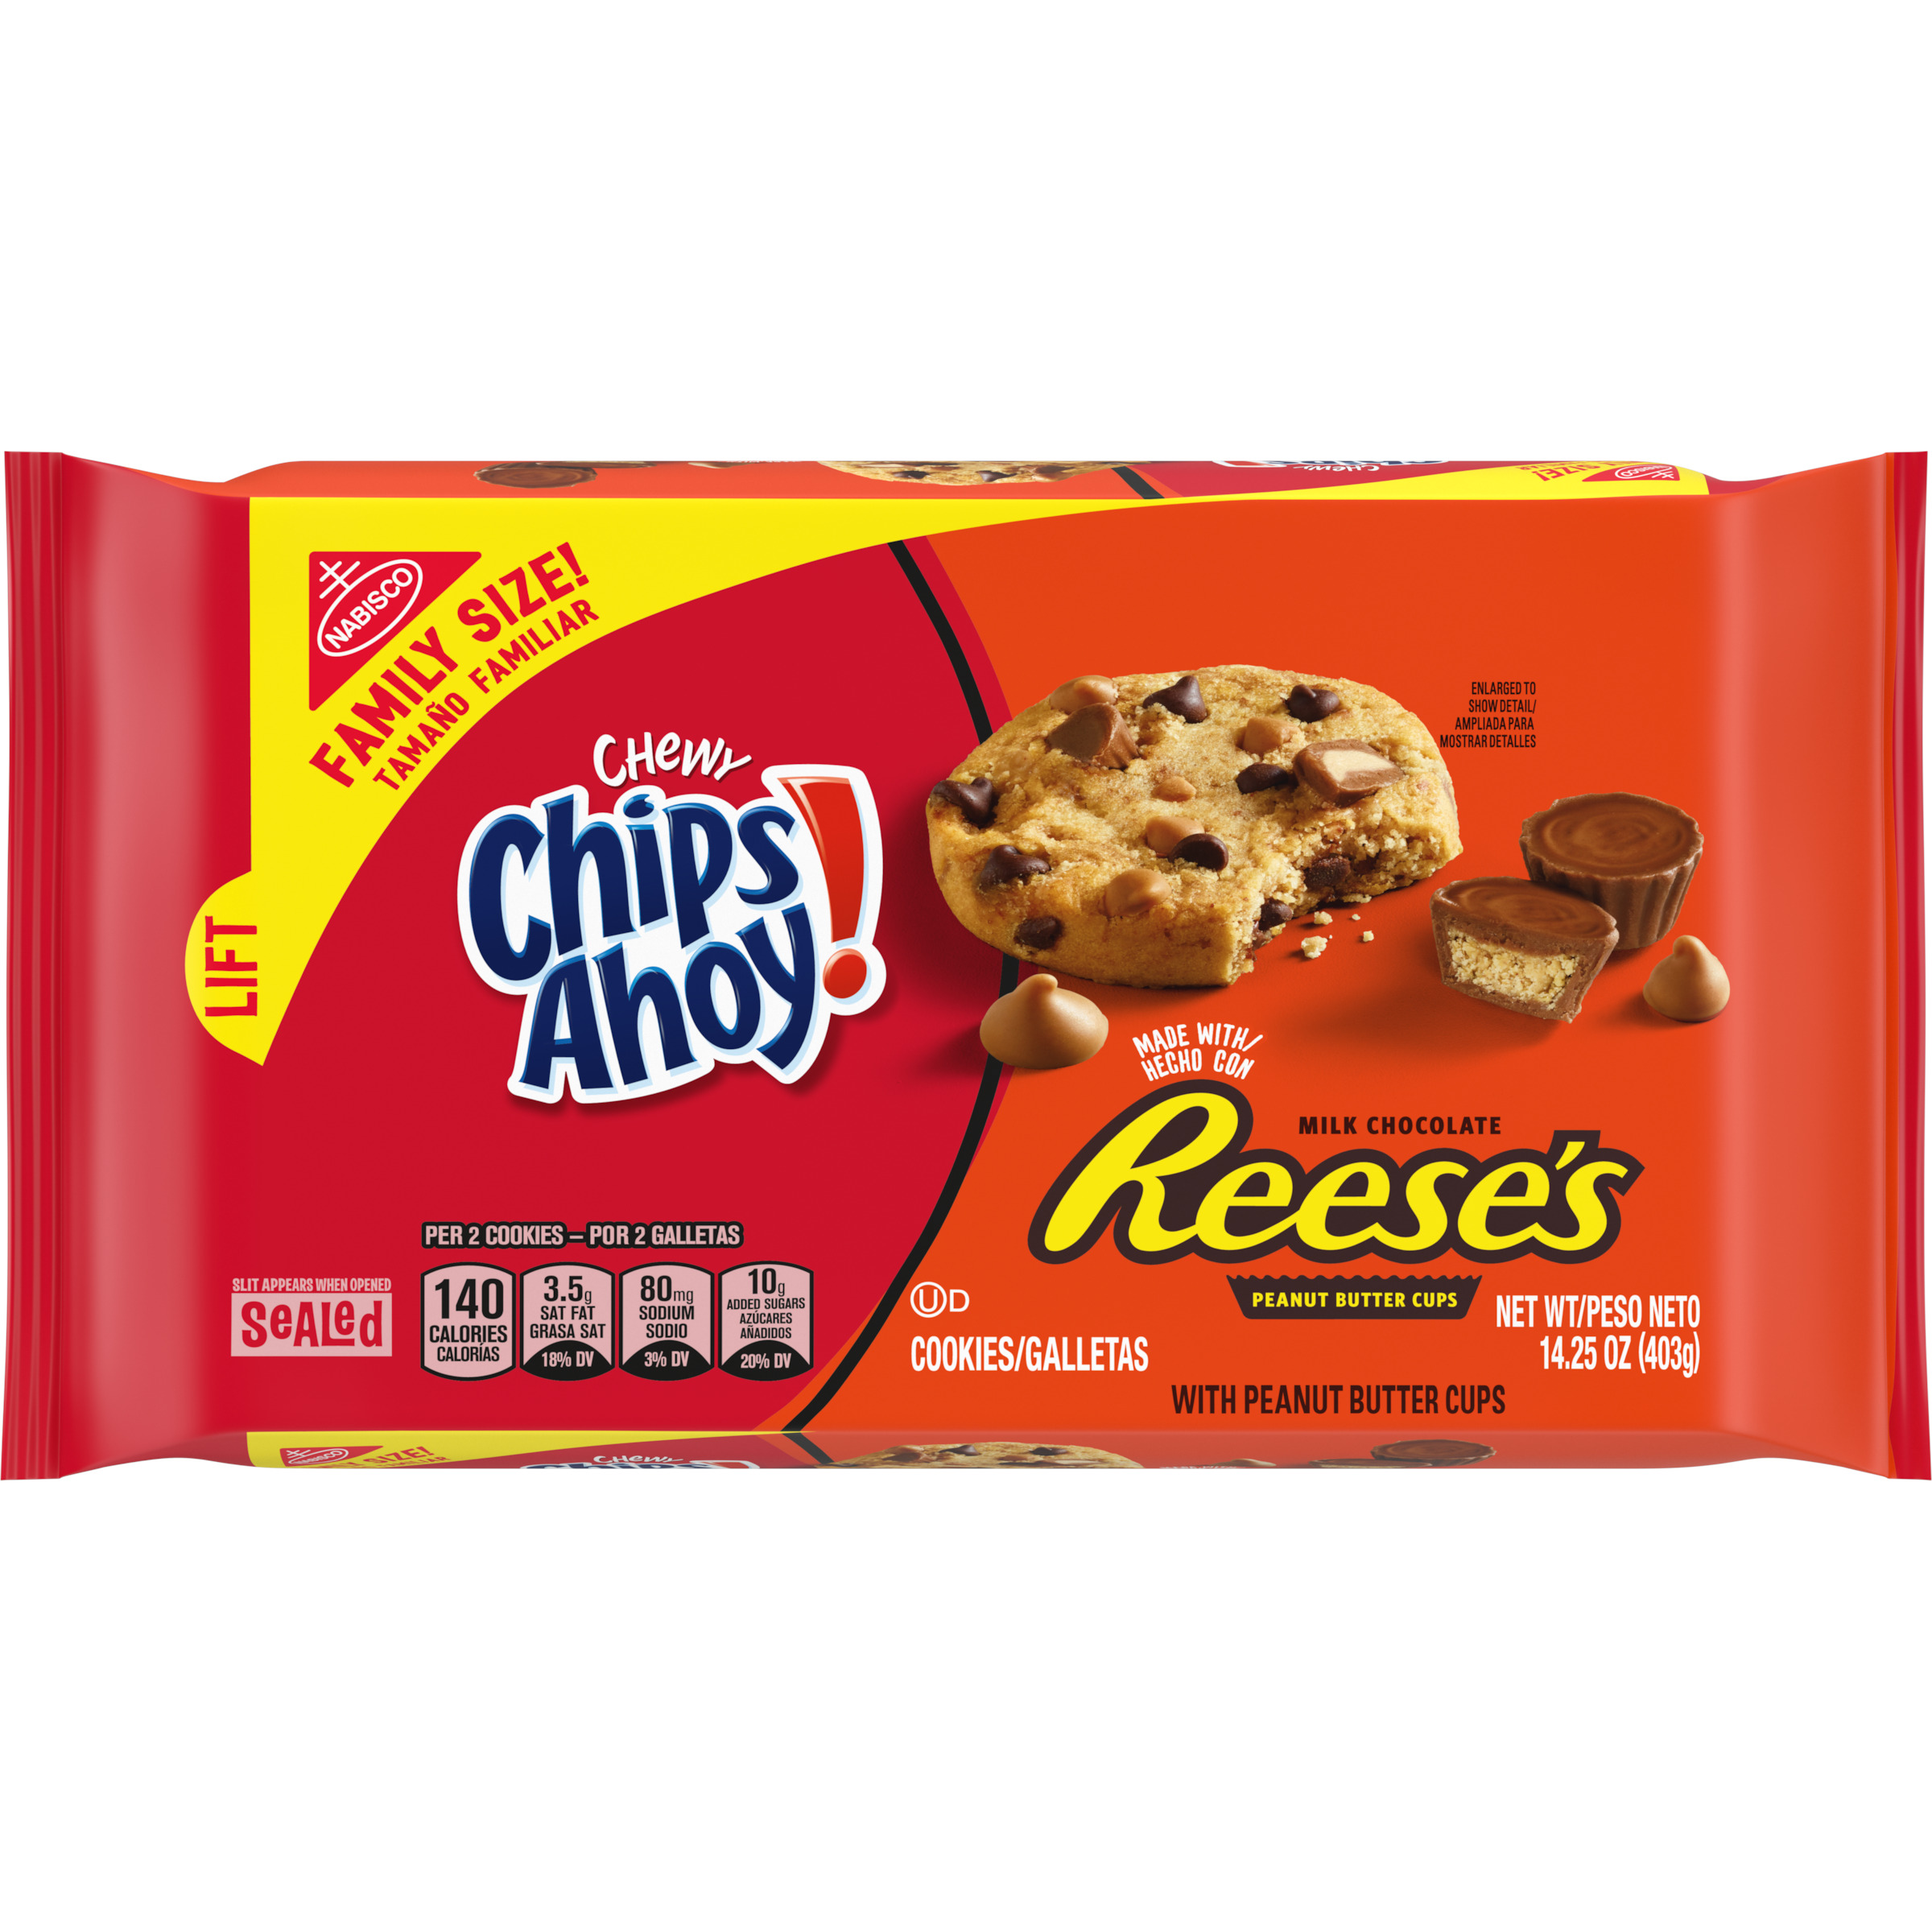 CHIPS AHOY! Chewy Chocolate Chip Cookies with Reese's Peanut Butter Cups, Family Size, 14.25 oz-3